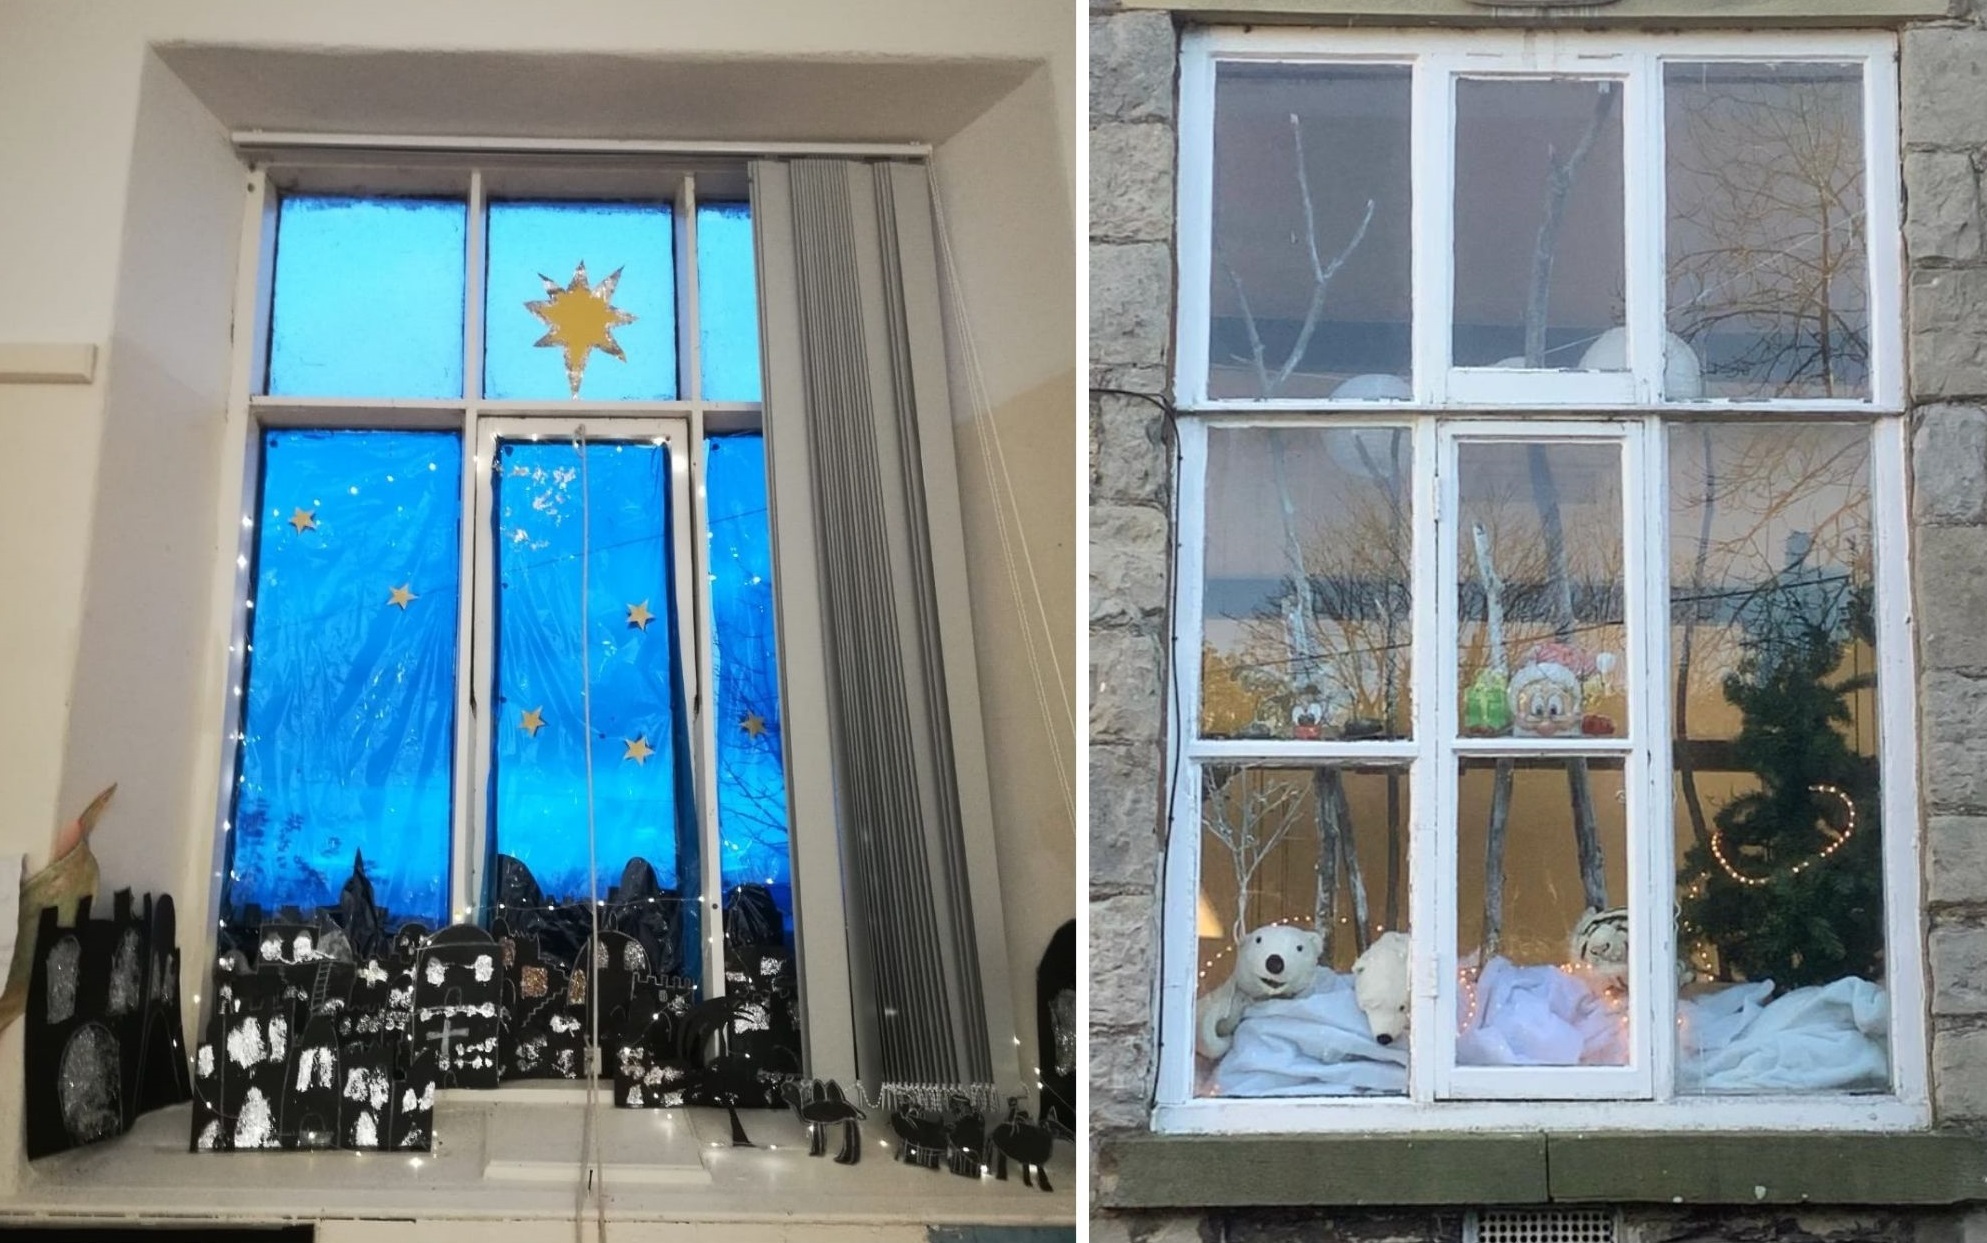 The Bethlehem scene of Key Stage 2 (left) and winter scene from the Foundation Phase (right) at Froncysyllte CP School.